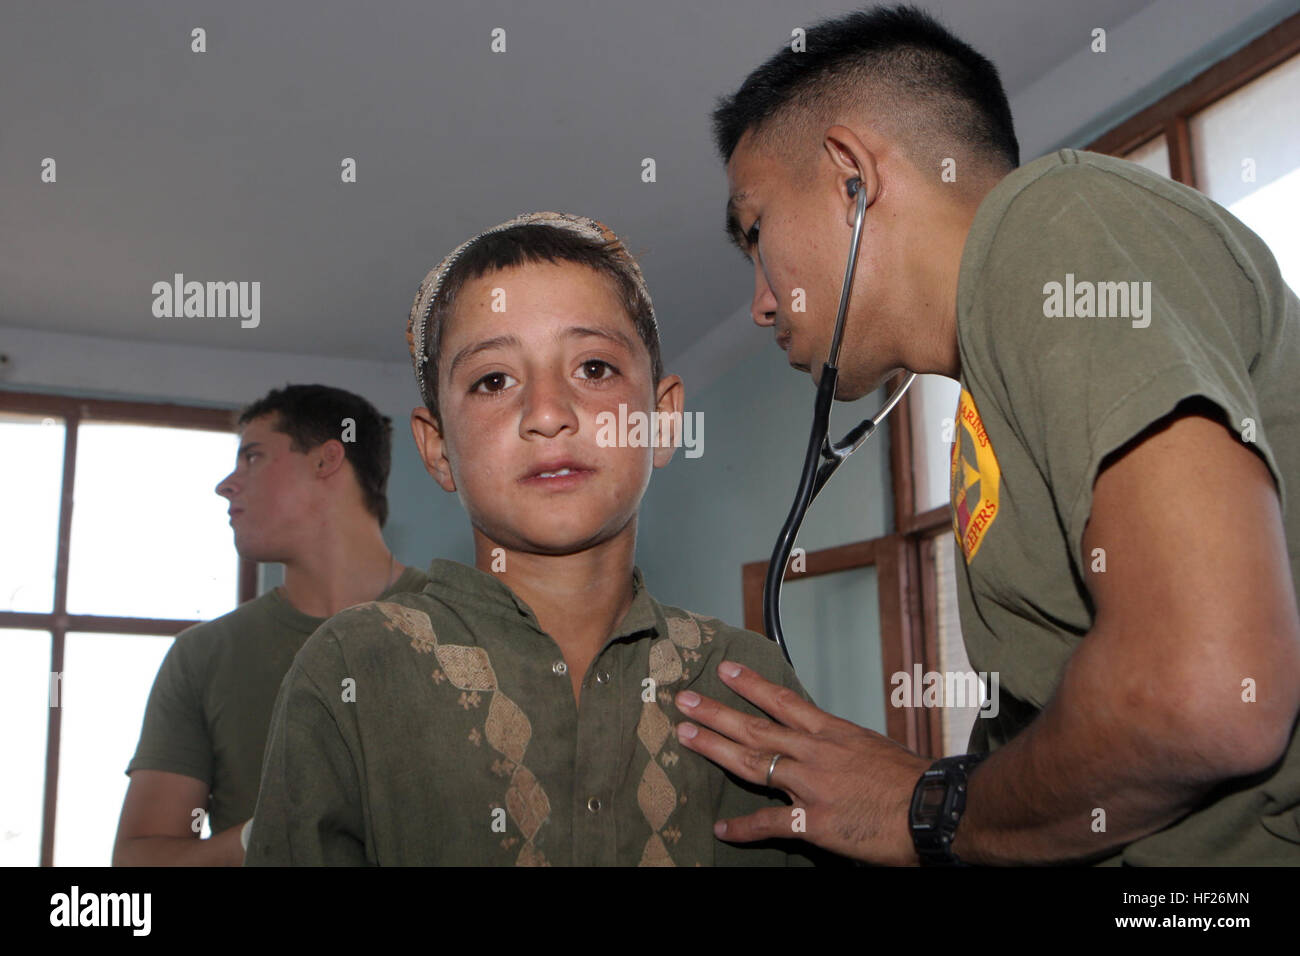 080824-M-8000M-013 DELERAM, Afghanistan (Aug. 24, 2008) Hospital Corpsman 1st Class Louie Bismonte, assigned to 2nd Battalion 7th Marines, treats a local child in the city of Deleram. Based at Marine Air Ground Combat Center Twenty Nine Palms, 2nd Battalion 7th Marines, is a reinforced light infantry battalion deployed to Afghanistan supporting Operation Enduring Freedom. (U.S. Marine Corps photo by Lance Cpl. James T. McKenzie/Released) US Navy 080824-M-8000M-013 Hospital Corpsman 1st Class Louie Bismonte, assigned to 2nd Battalion 7th Marines, treats a local child in the city of Deleram Stock Photo